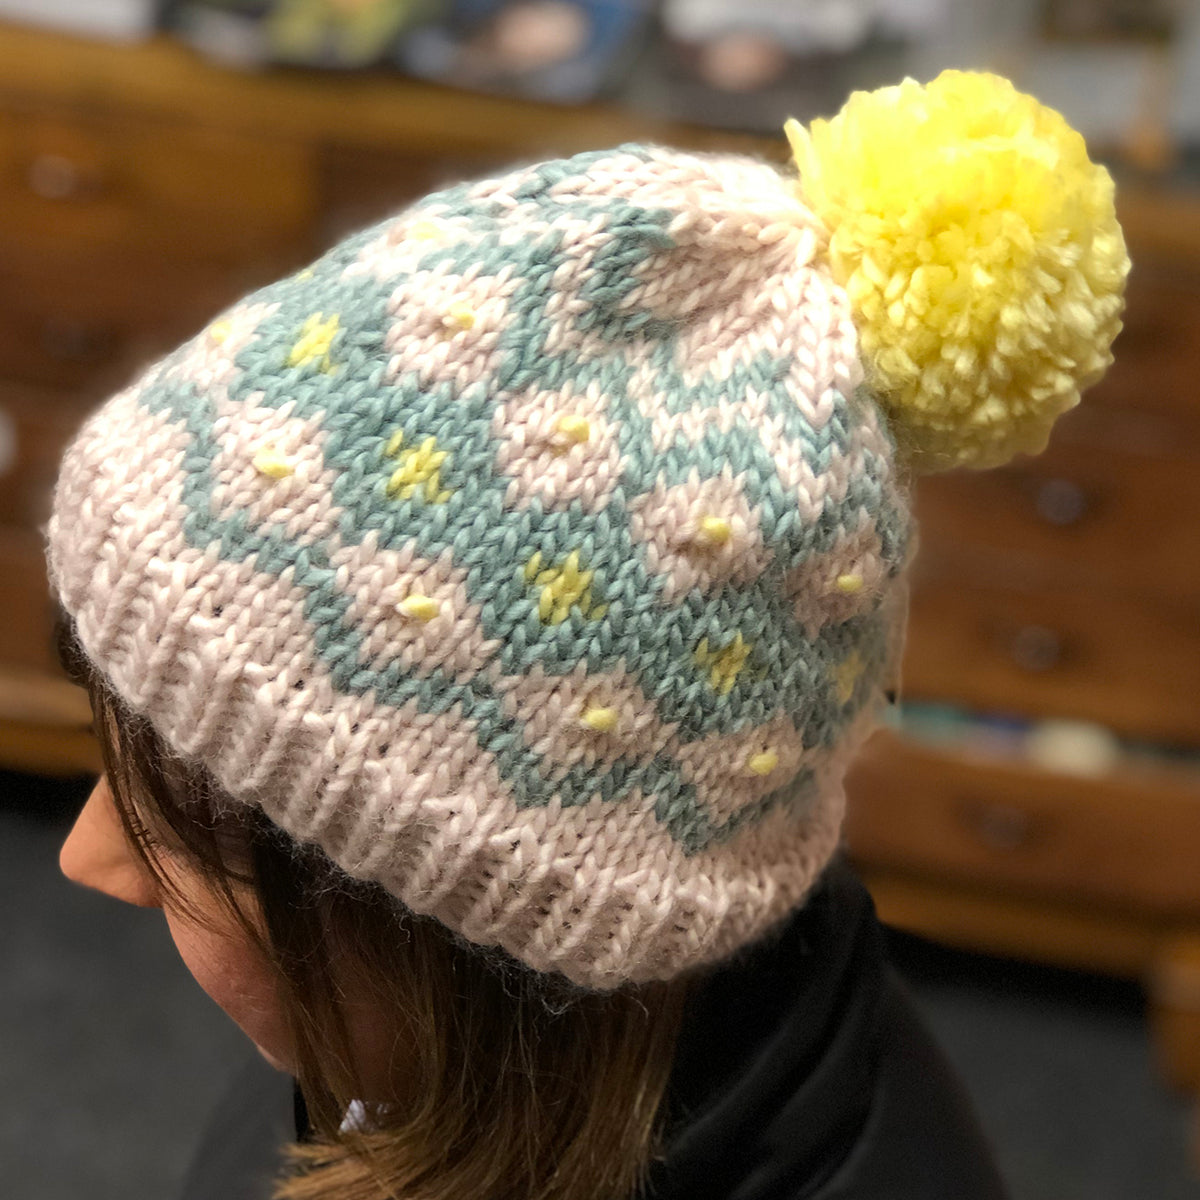 Hats, hats and more hats! Knit and crochet hats to make